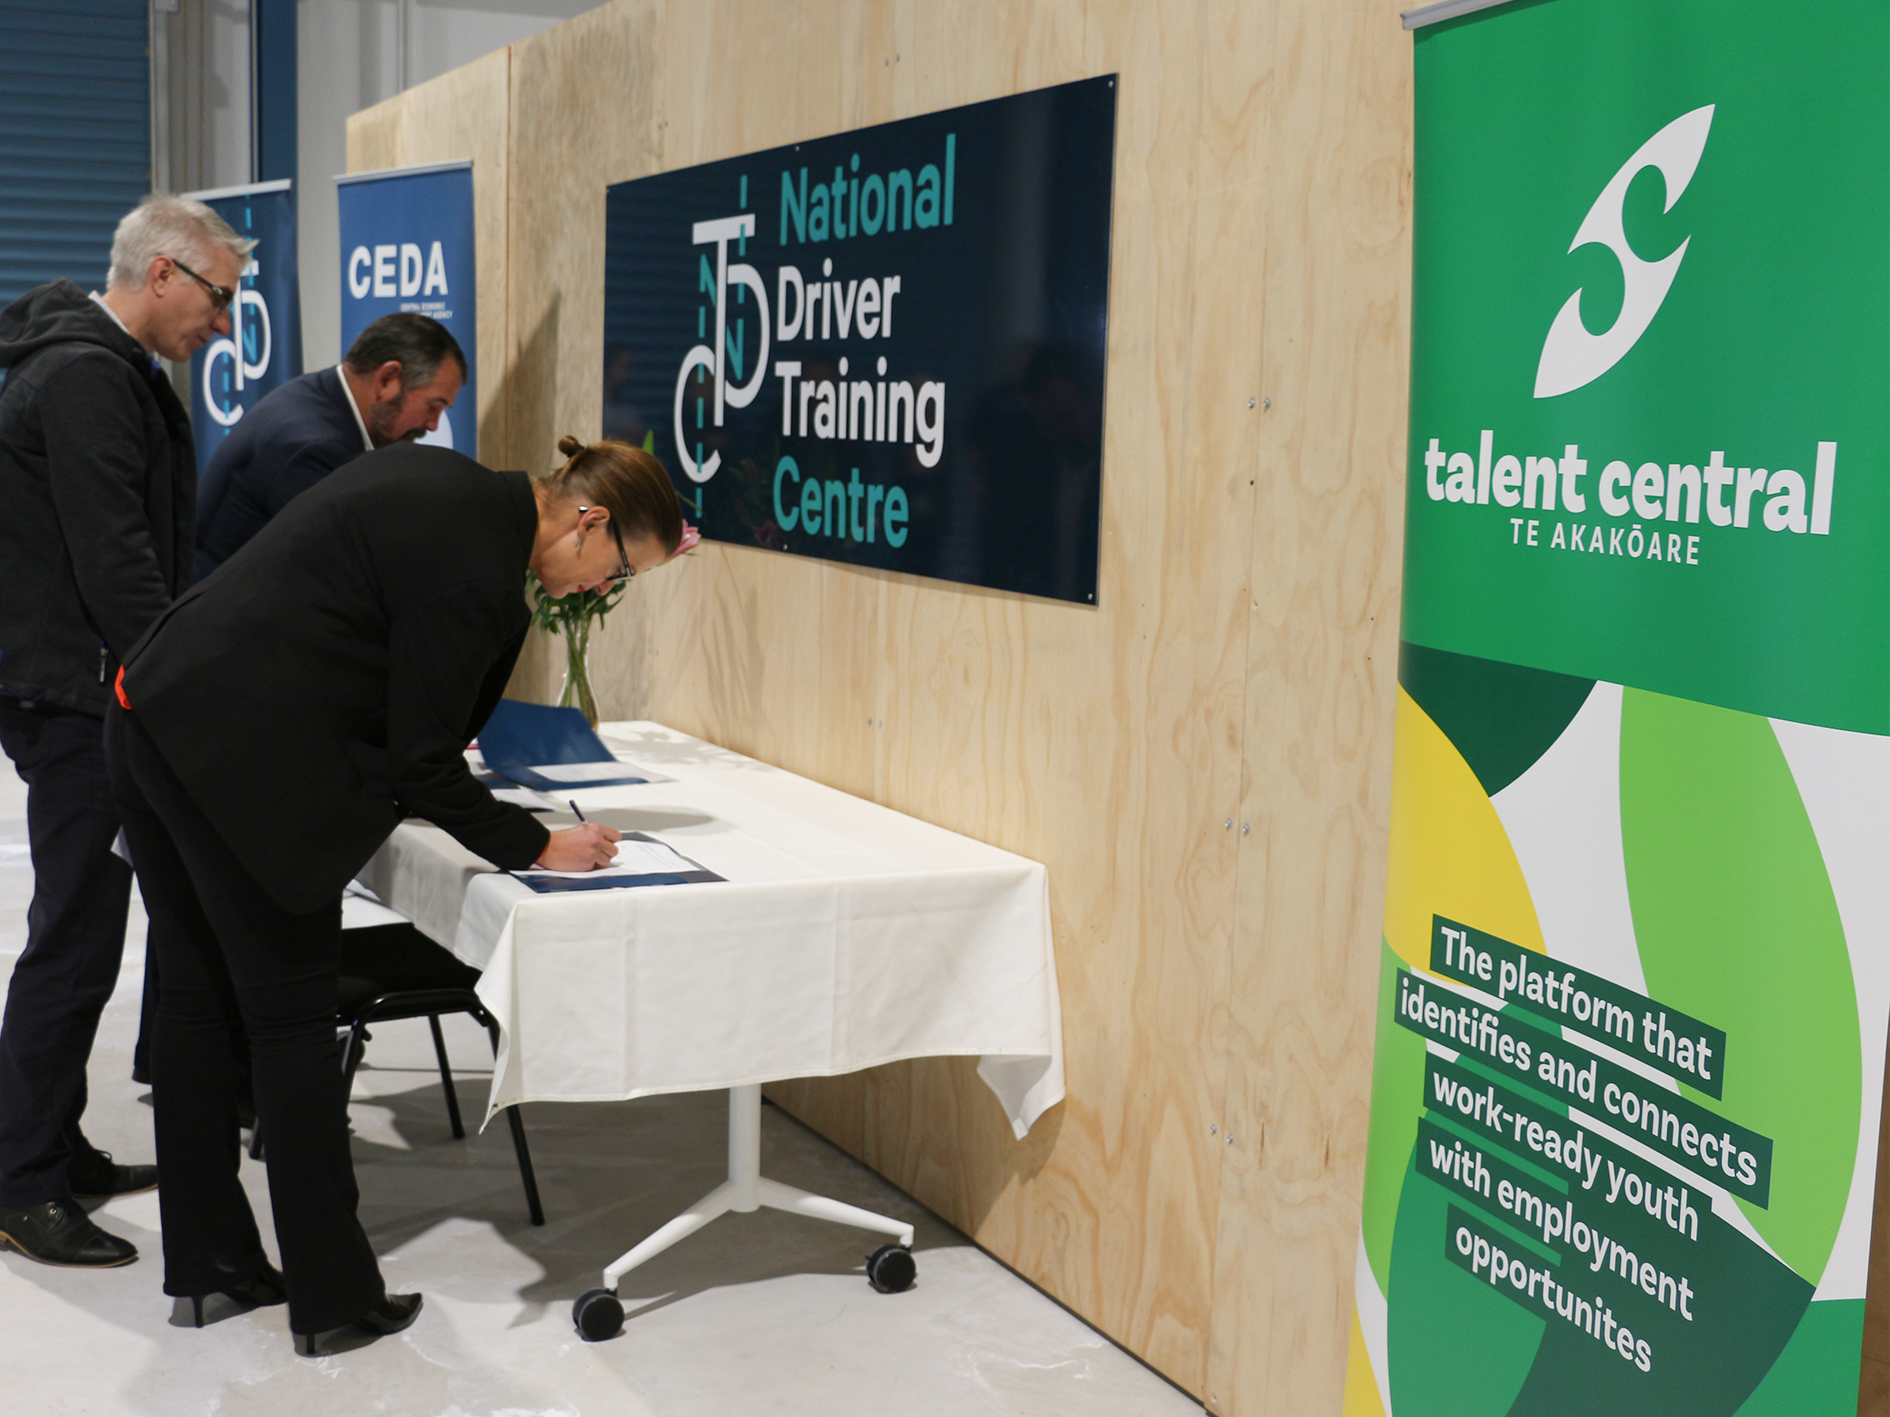 CEDA has led the partnering of four organisations to support the development of sustainable talent pipelines for Manawatū and to deliver work ready employees